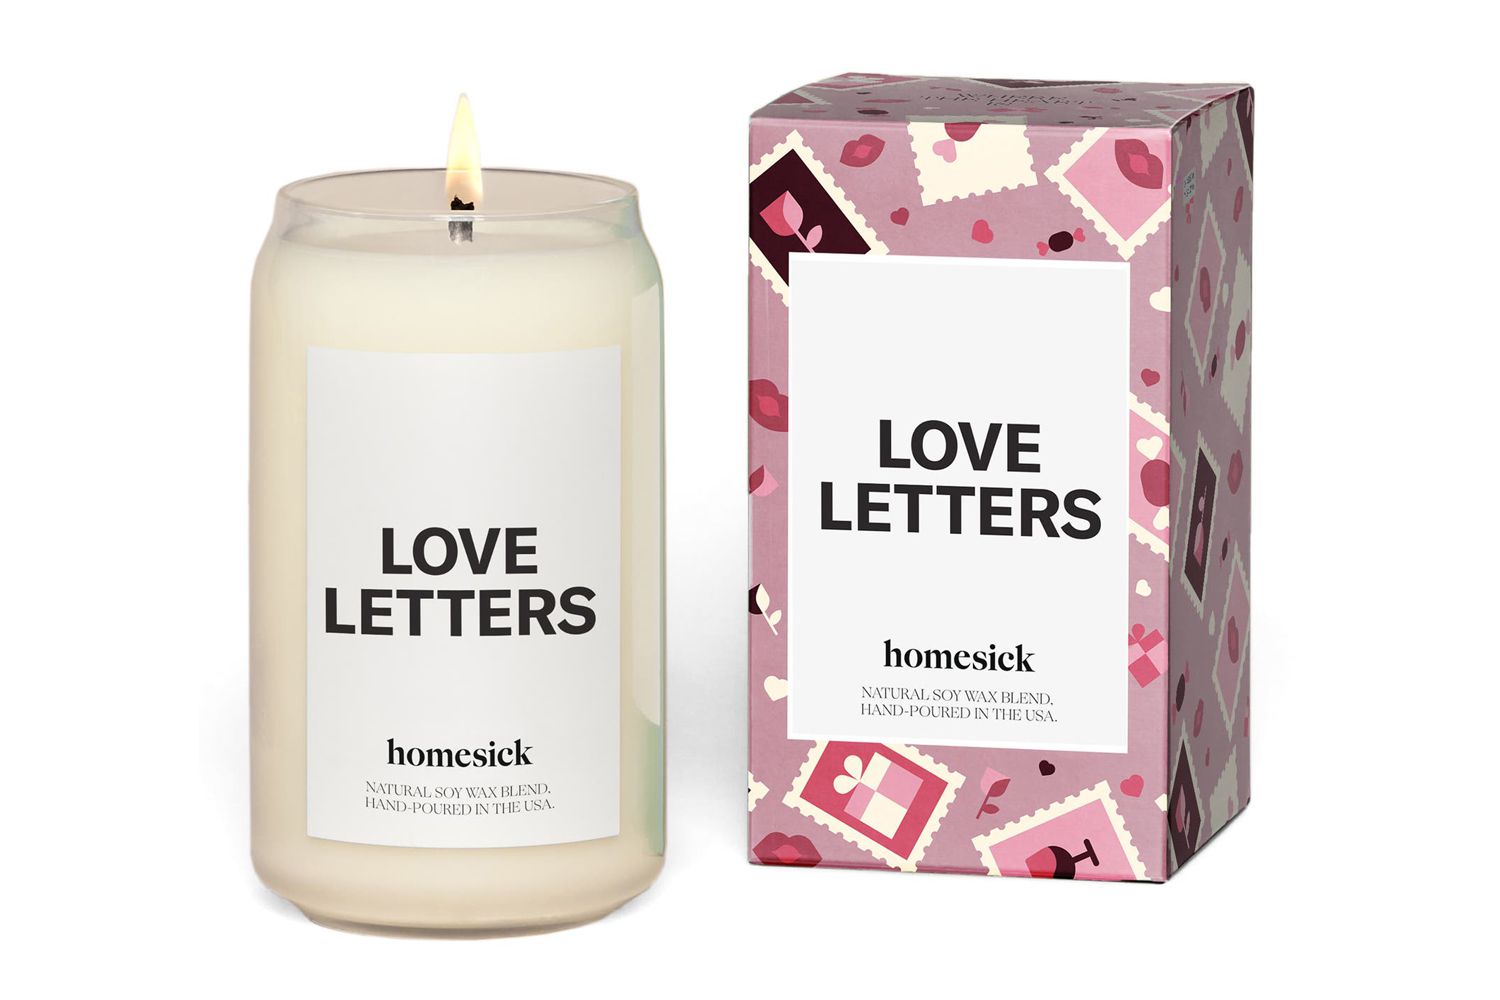 Nordstrom Homesick Love Letters Candle